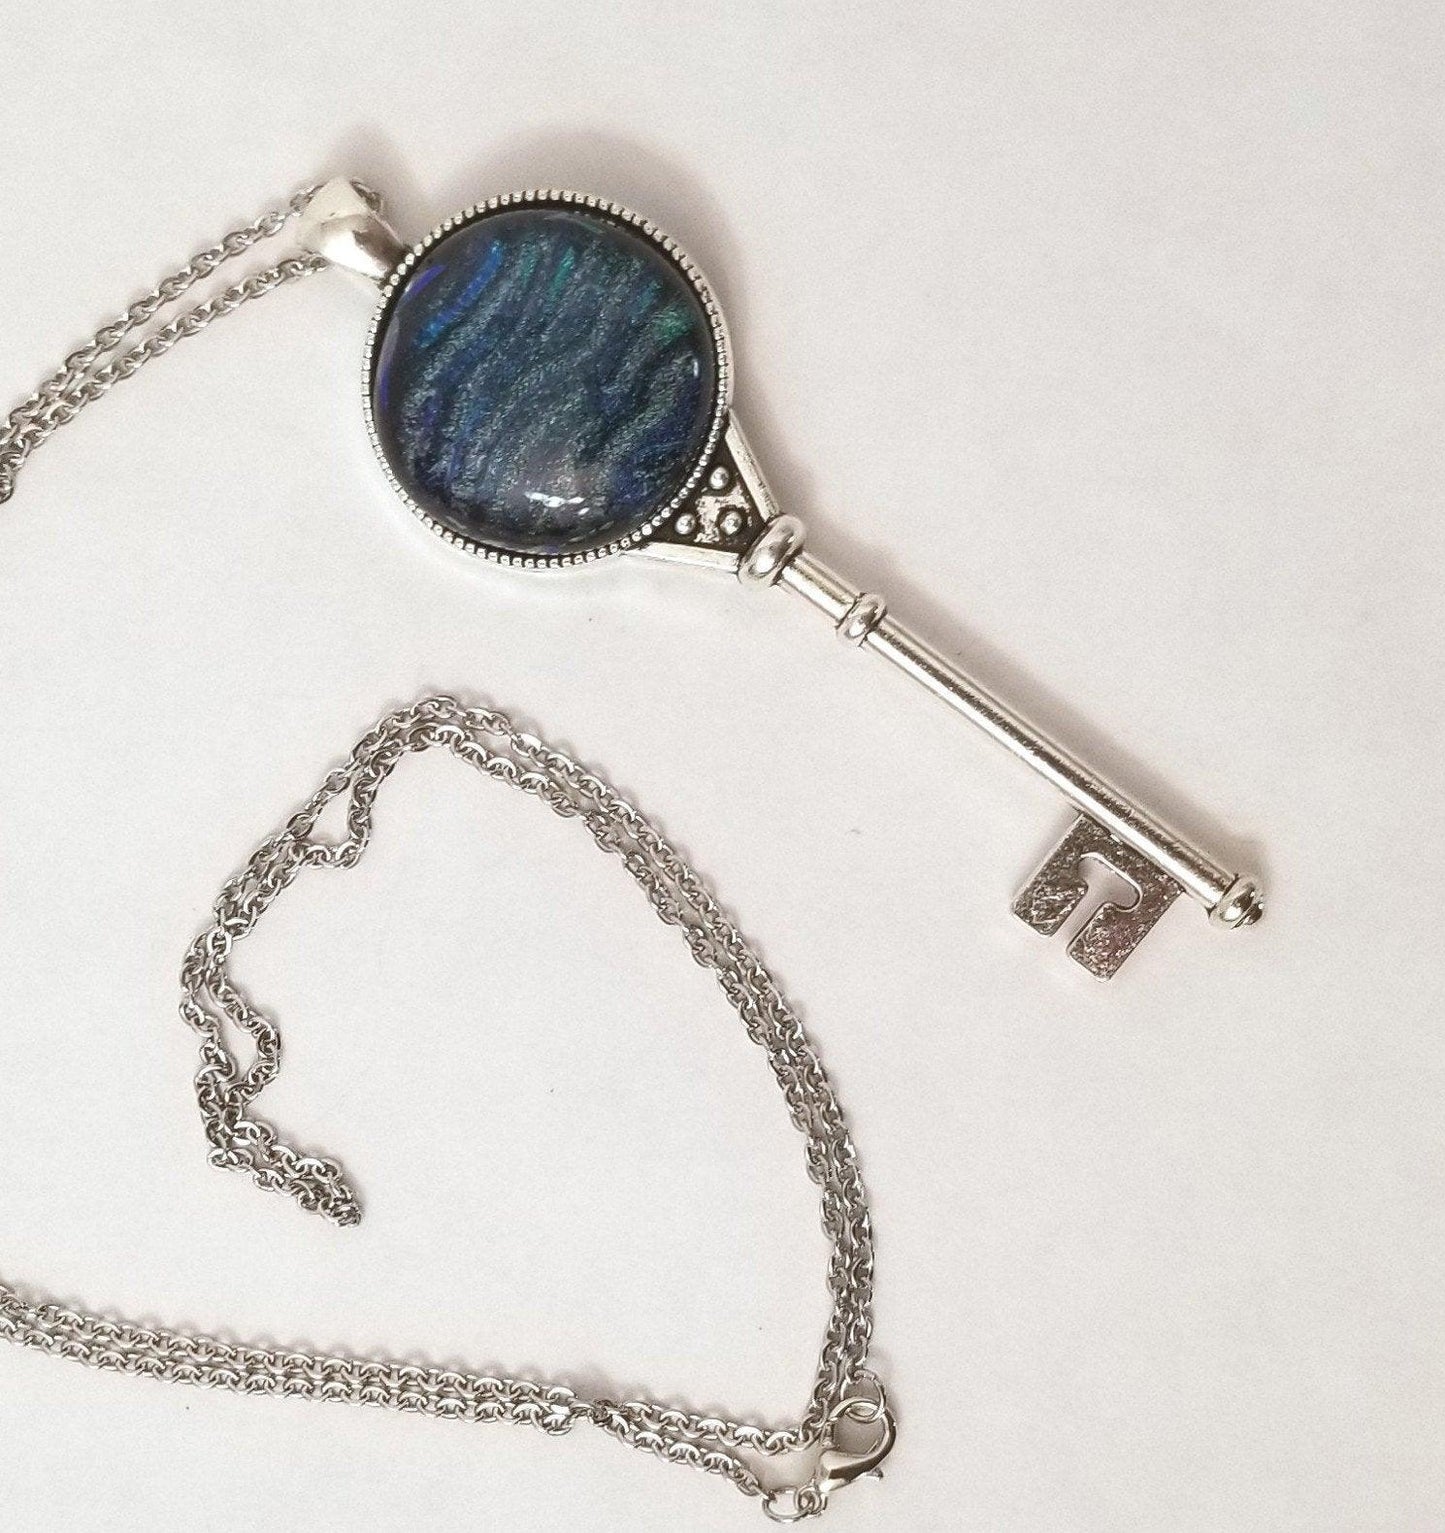 Silver Finish Skeleton Key with Fused Glass Blue Wave Dichroic cabochon on 24 inch Steel chain Seeds Glassworks